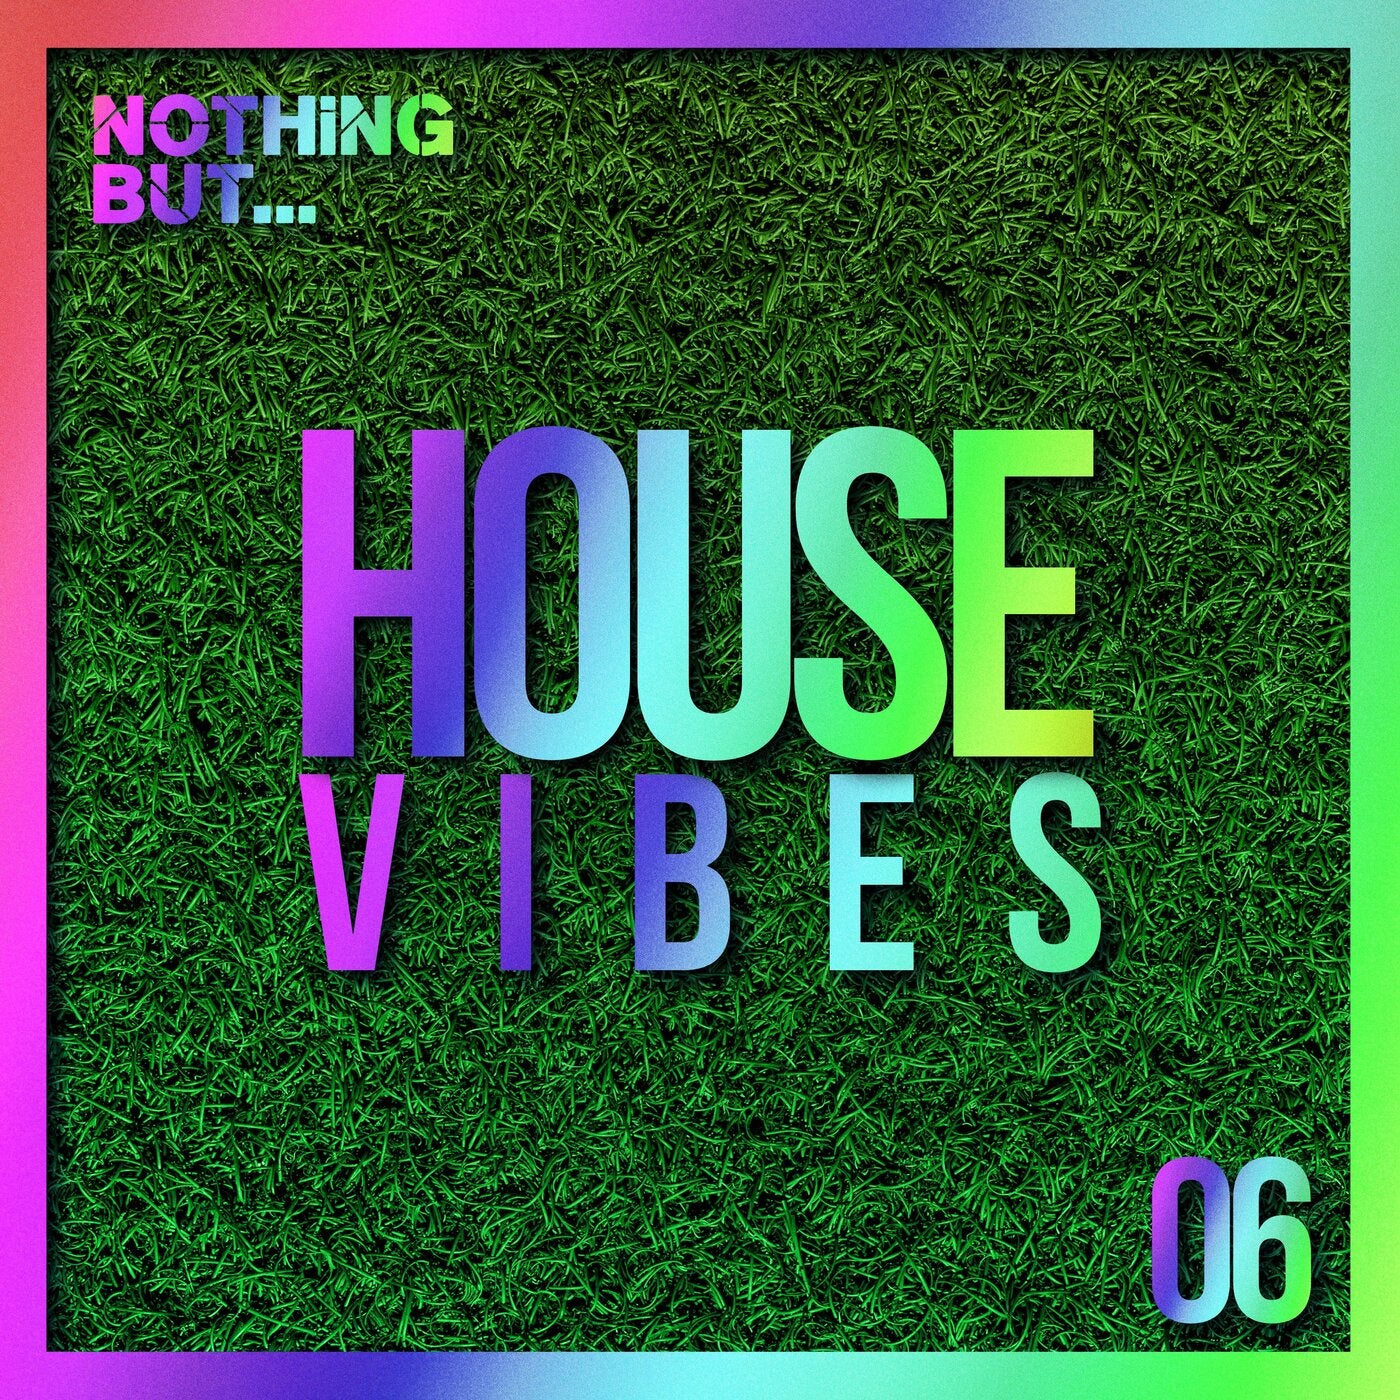 Nothing But... House Vibes, Vol. 06